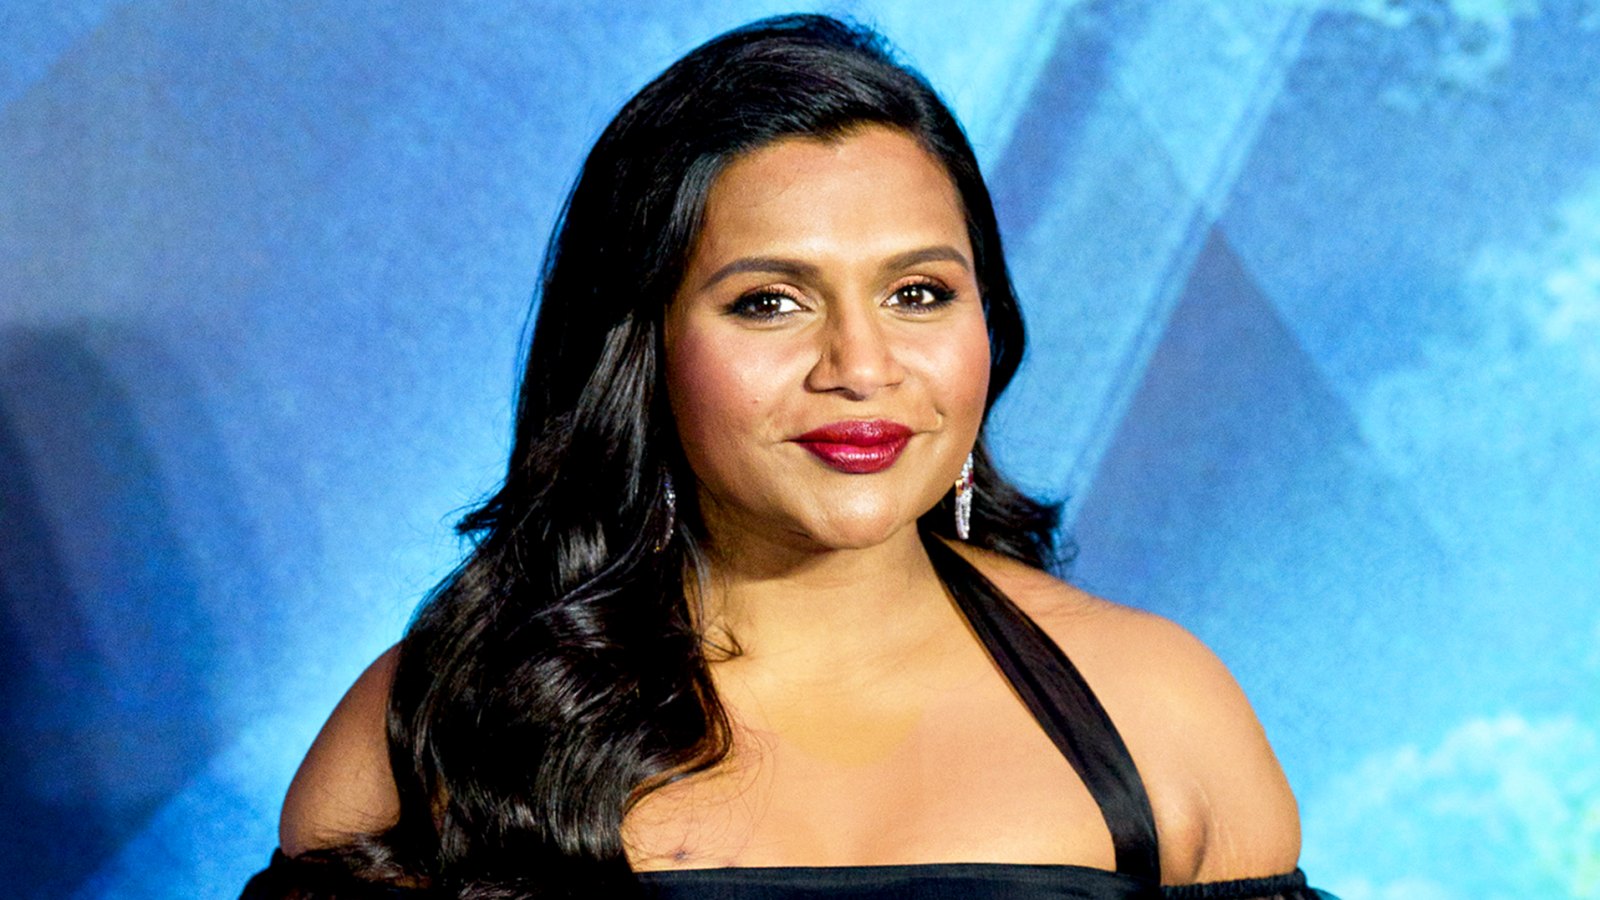 Mindy Kaling attends the European Premiere of 'A Wrinkle In Time' at BFI IMAX on March 13, 2018 in London, England.